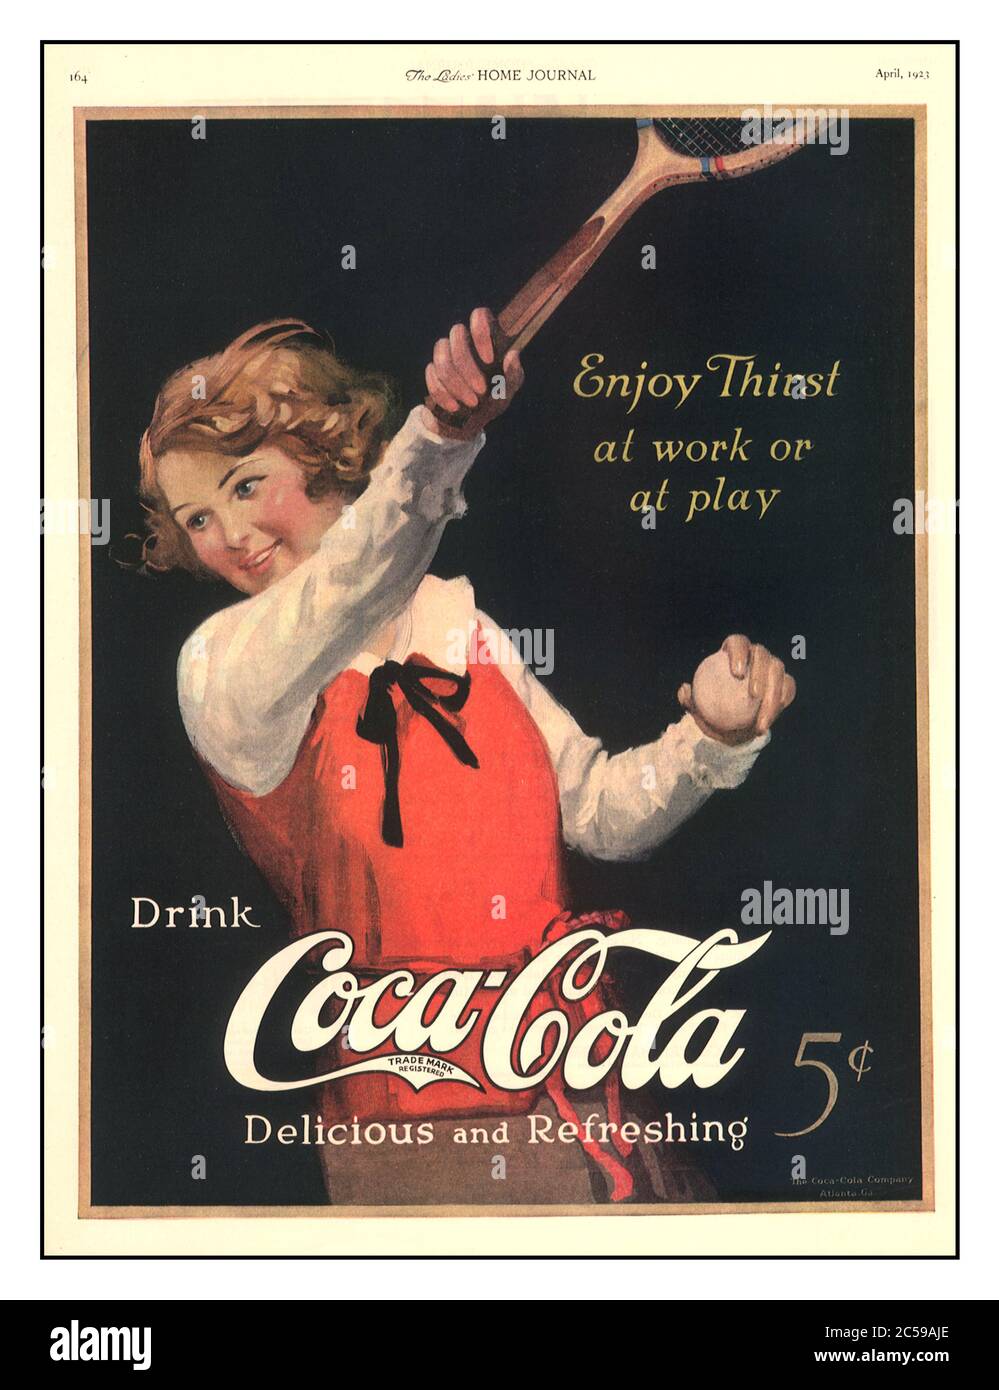 Coca Cola Vintage archive 1920's Coca Cola Press advertisement The Ladies Home Journal 1923 ' Enjoy the Thirst at work or at play' illustrating a young woman playing tennis in 1920s fashion sports wear Stock Photo